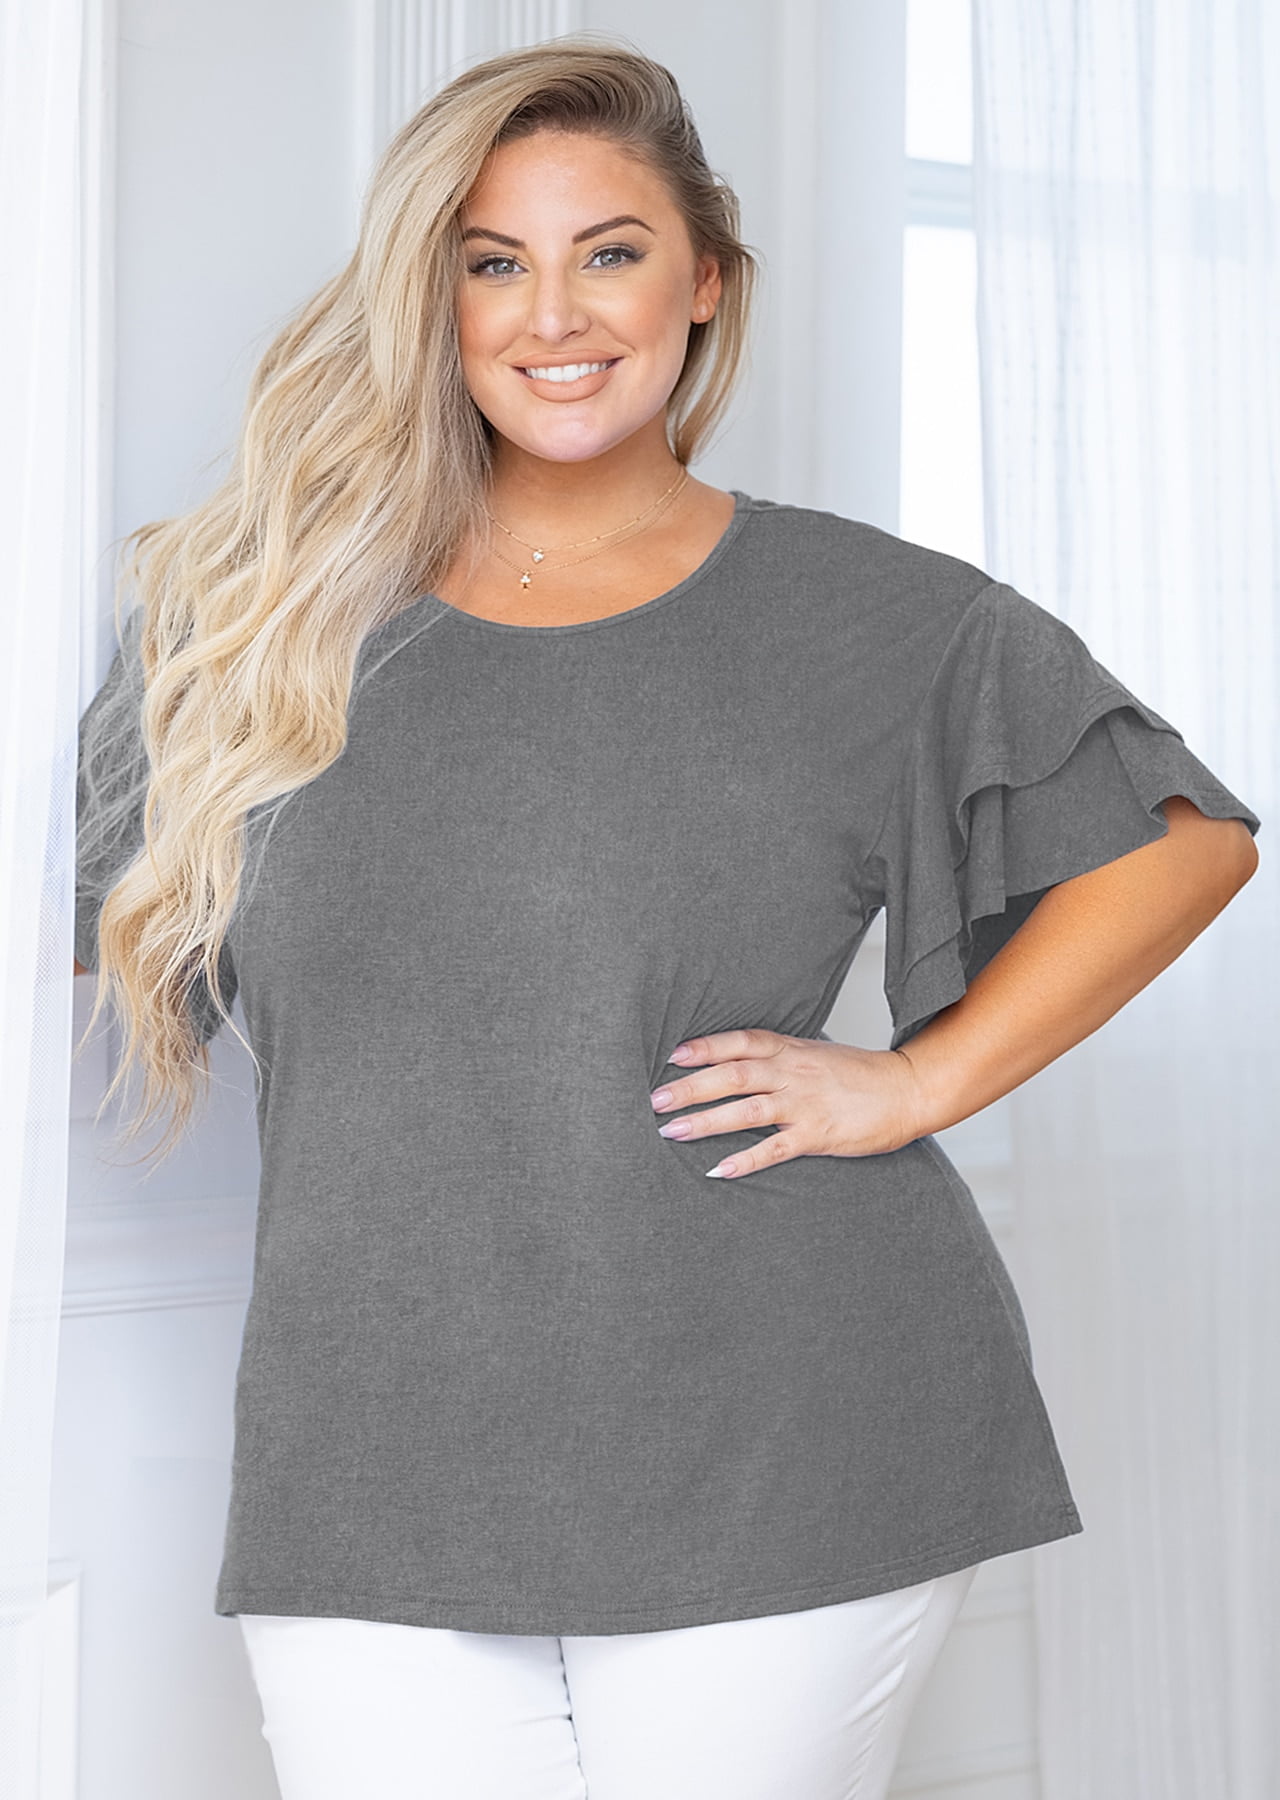 SHOWMALL Plus Size Women Top Short Sleeve Gray 3X Tunic Shirt Summer  Maternity Clothing Loose Fitting Blouse Clothes